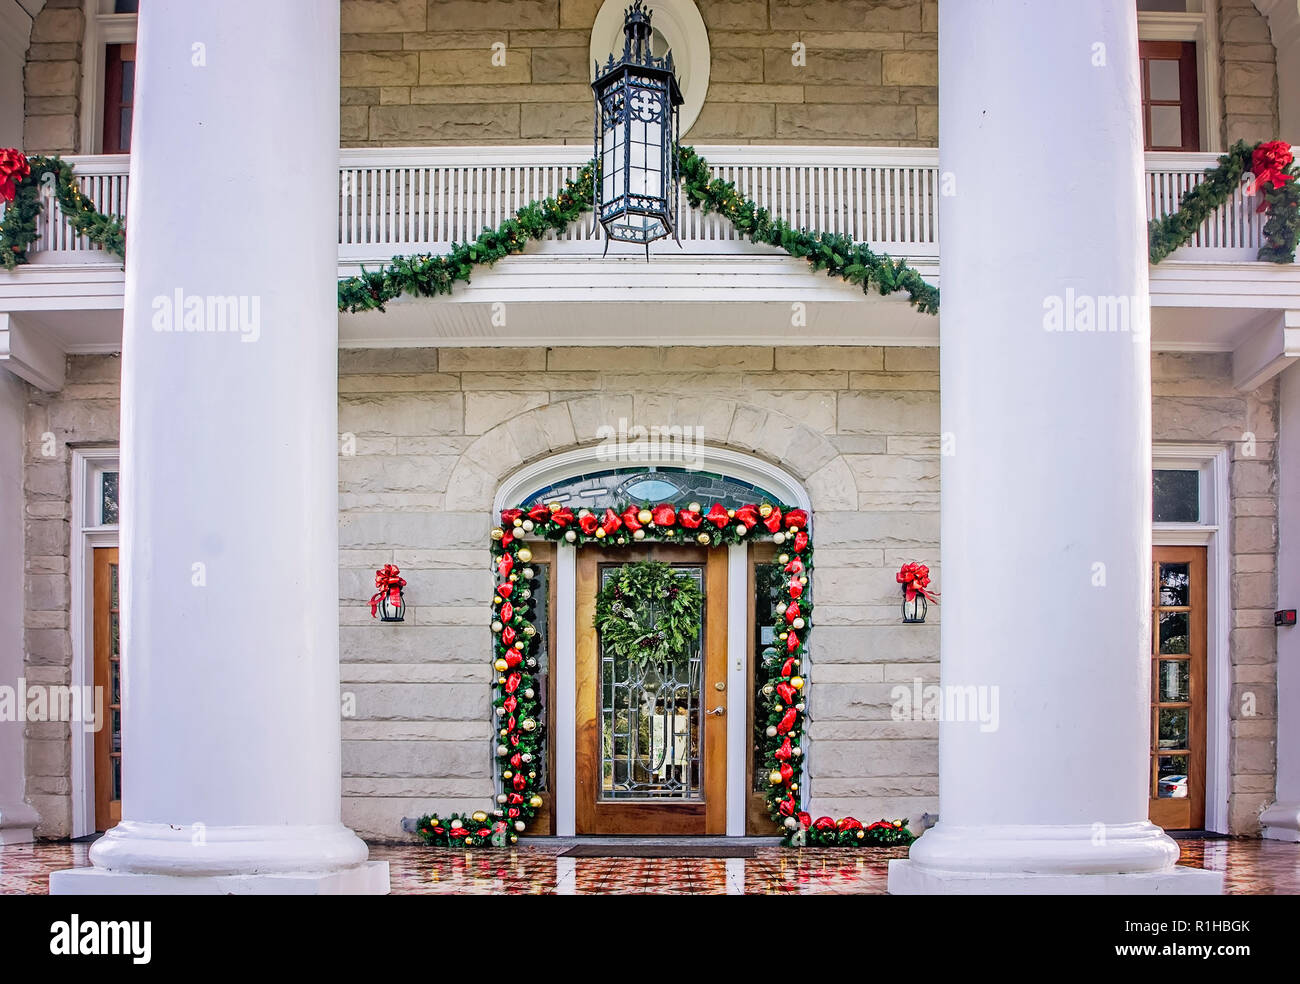 The Pillars, an event venue, is decorated for Christmas, Dec. 18, 2017, in Mobile, Alabama. Stock Photo